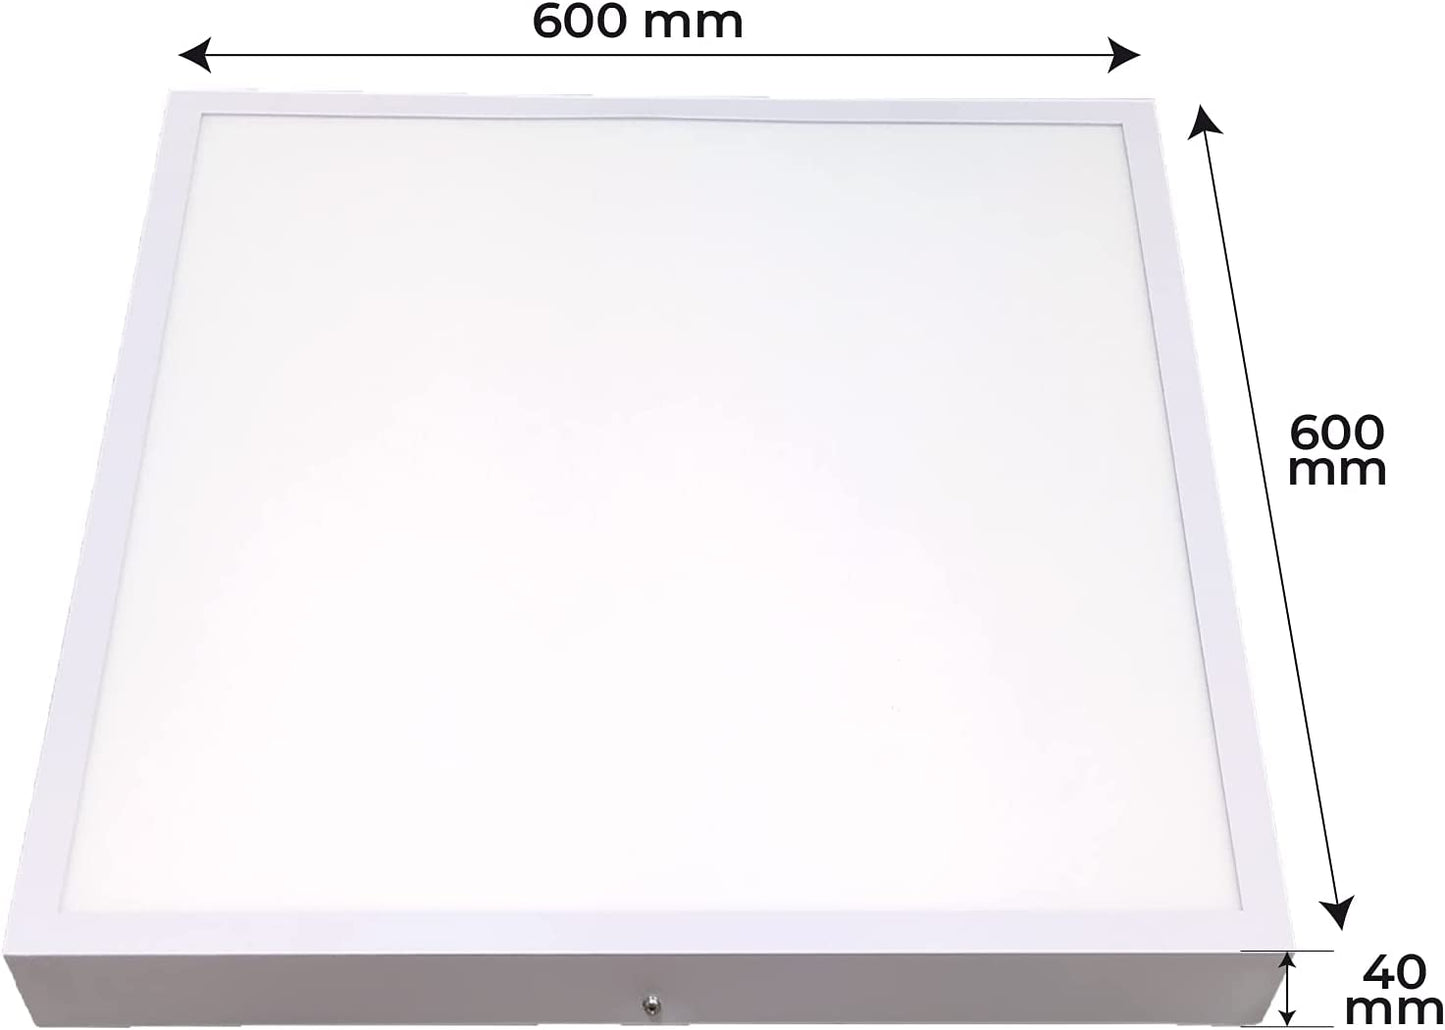 Square Overlay Ceiling Lamp 48W White